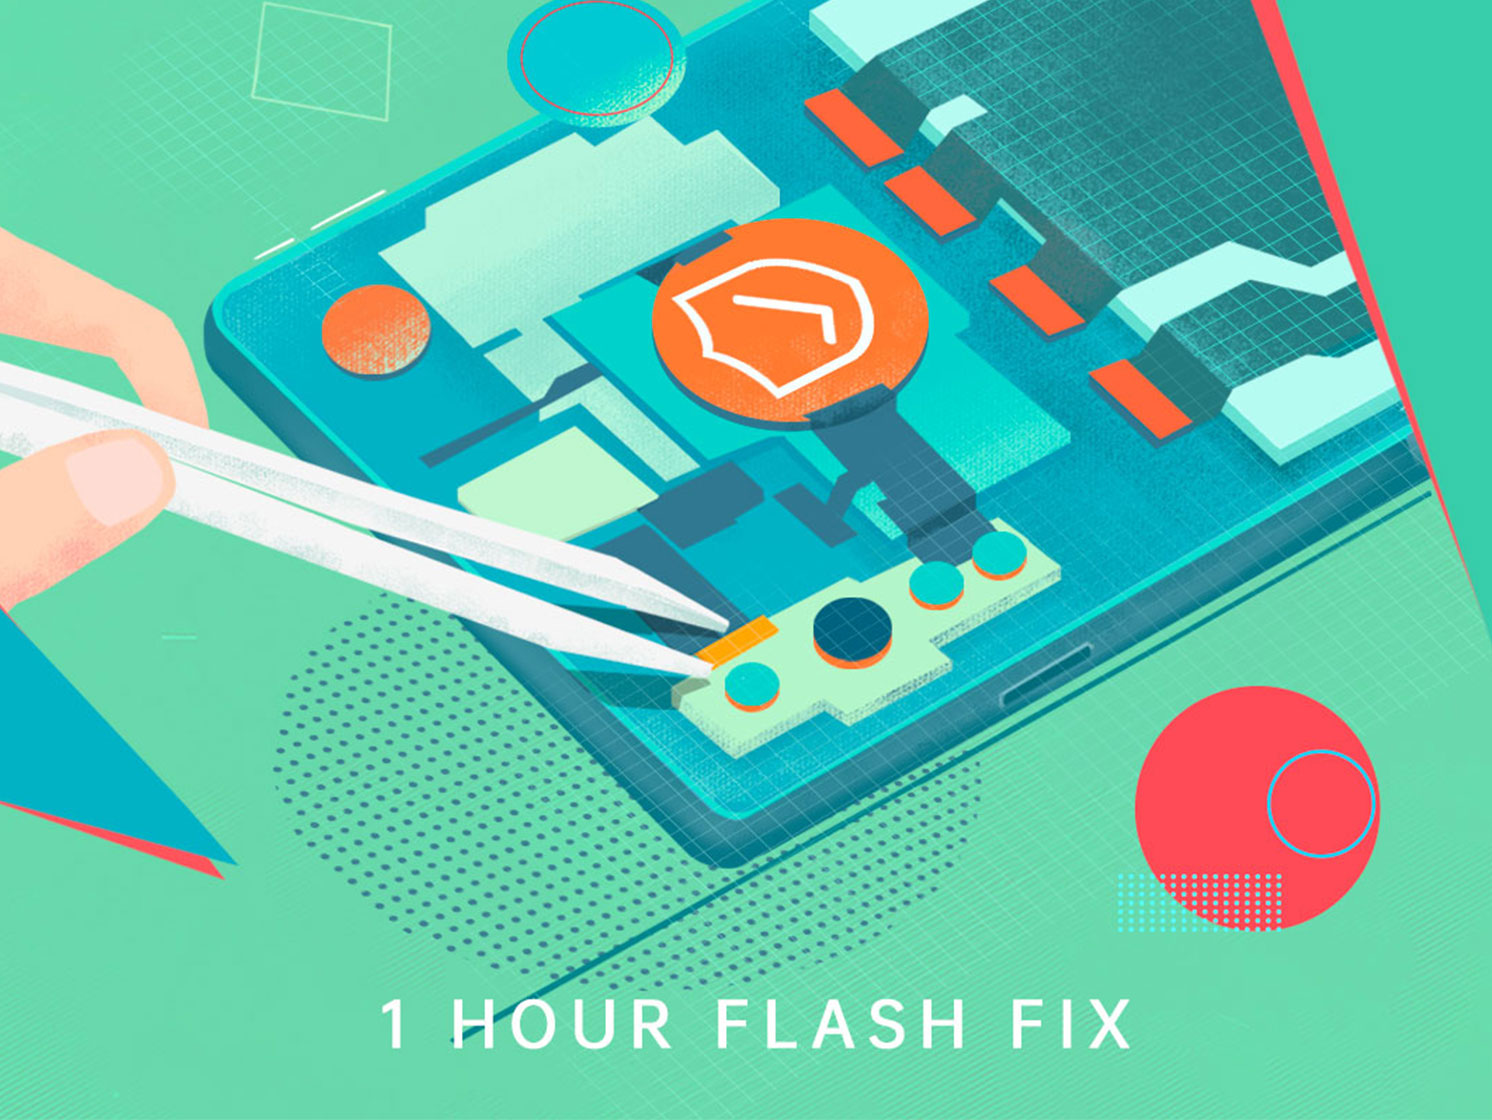 OPPO Care – Fast, Reliable & Comfortable 1-Hour Device Repairs